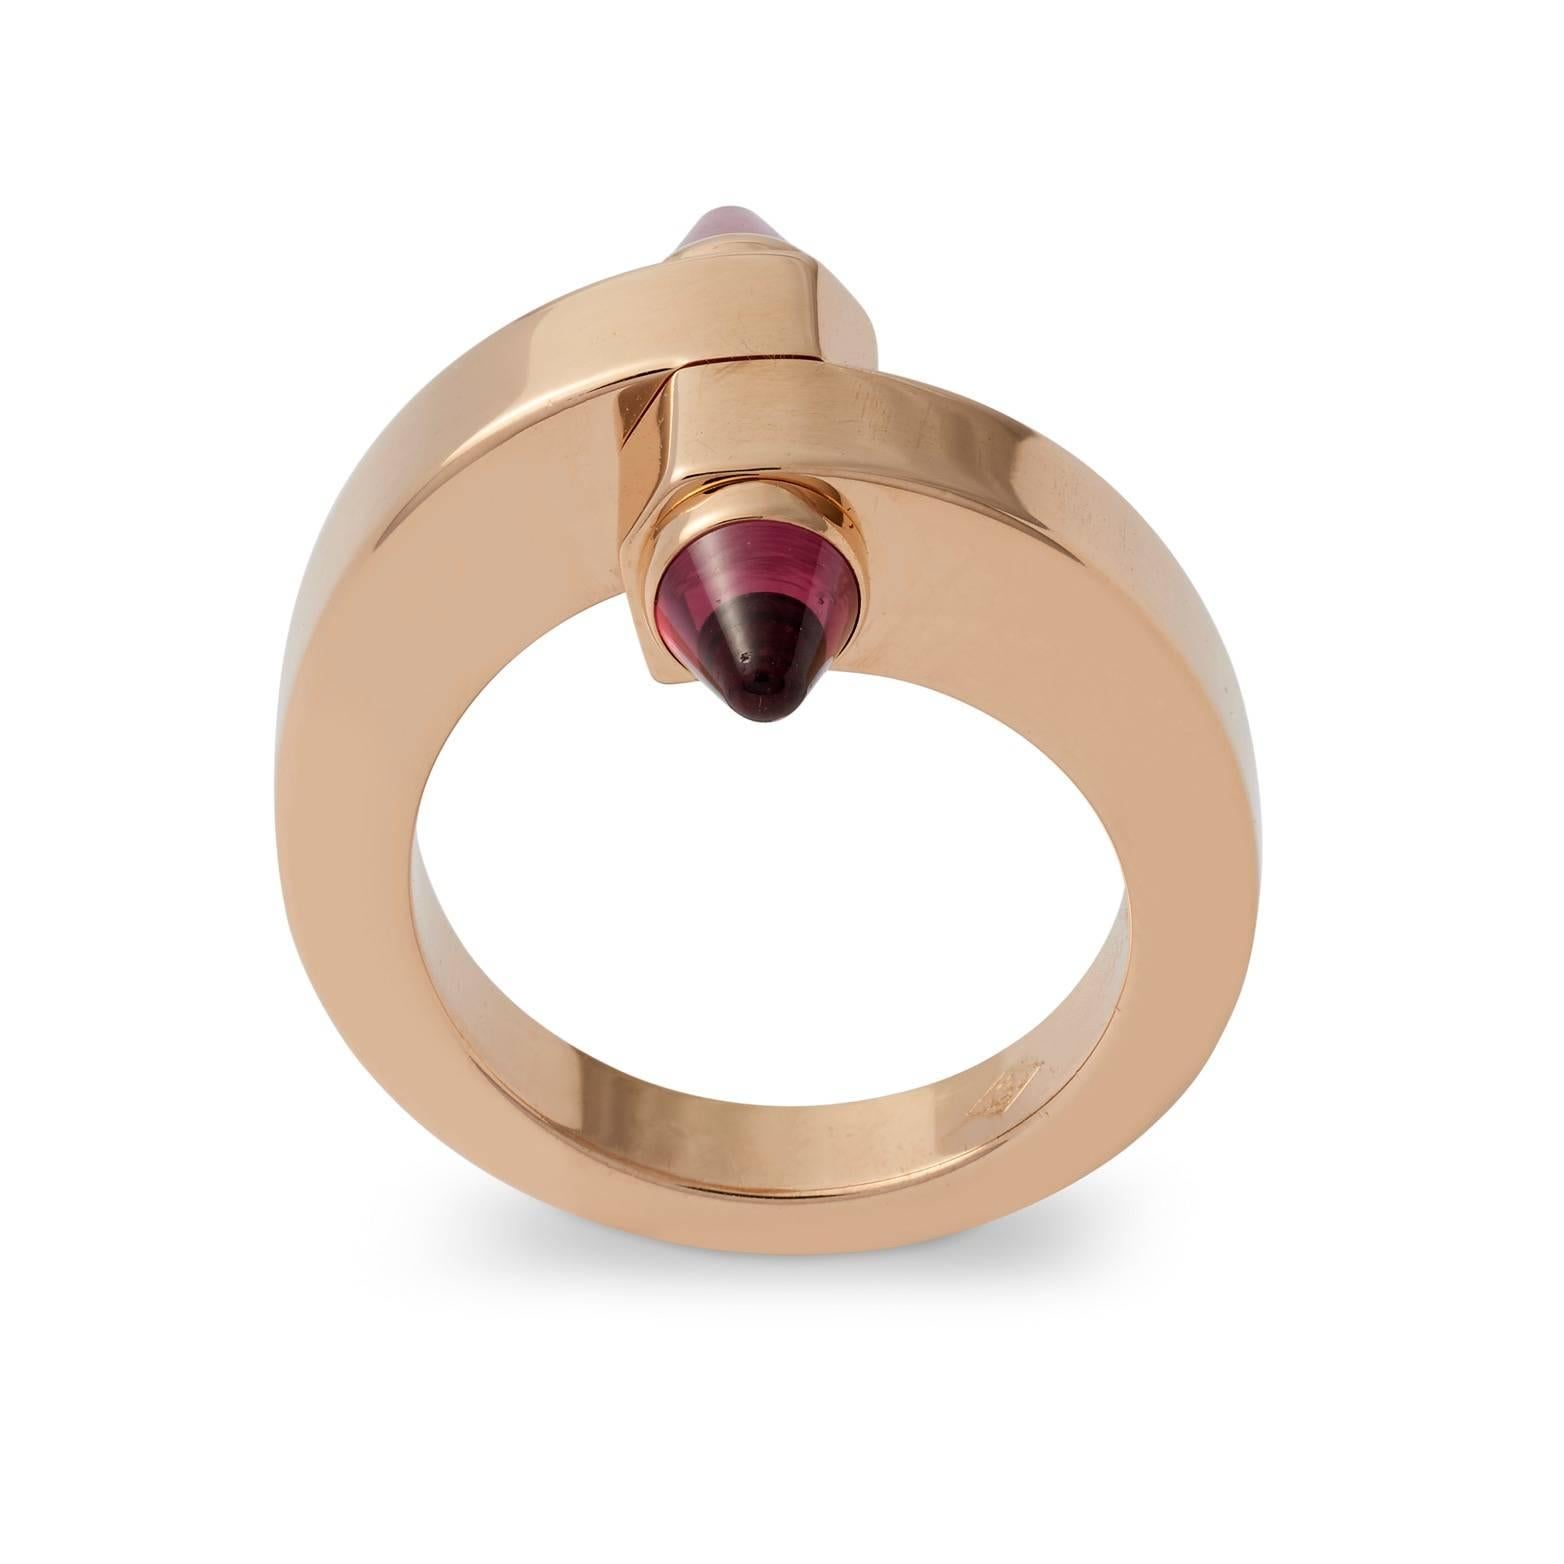 An extremely chic 18ct rose gold and bullet cut cabochon garnet Menotte ring signed by Cartier and numbered BO6781

Finger Size Europe 52, USA 5.75, GB L.5